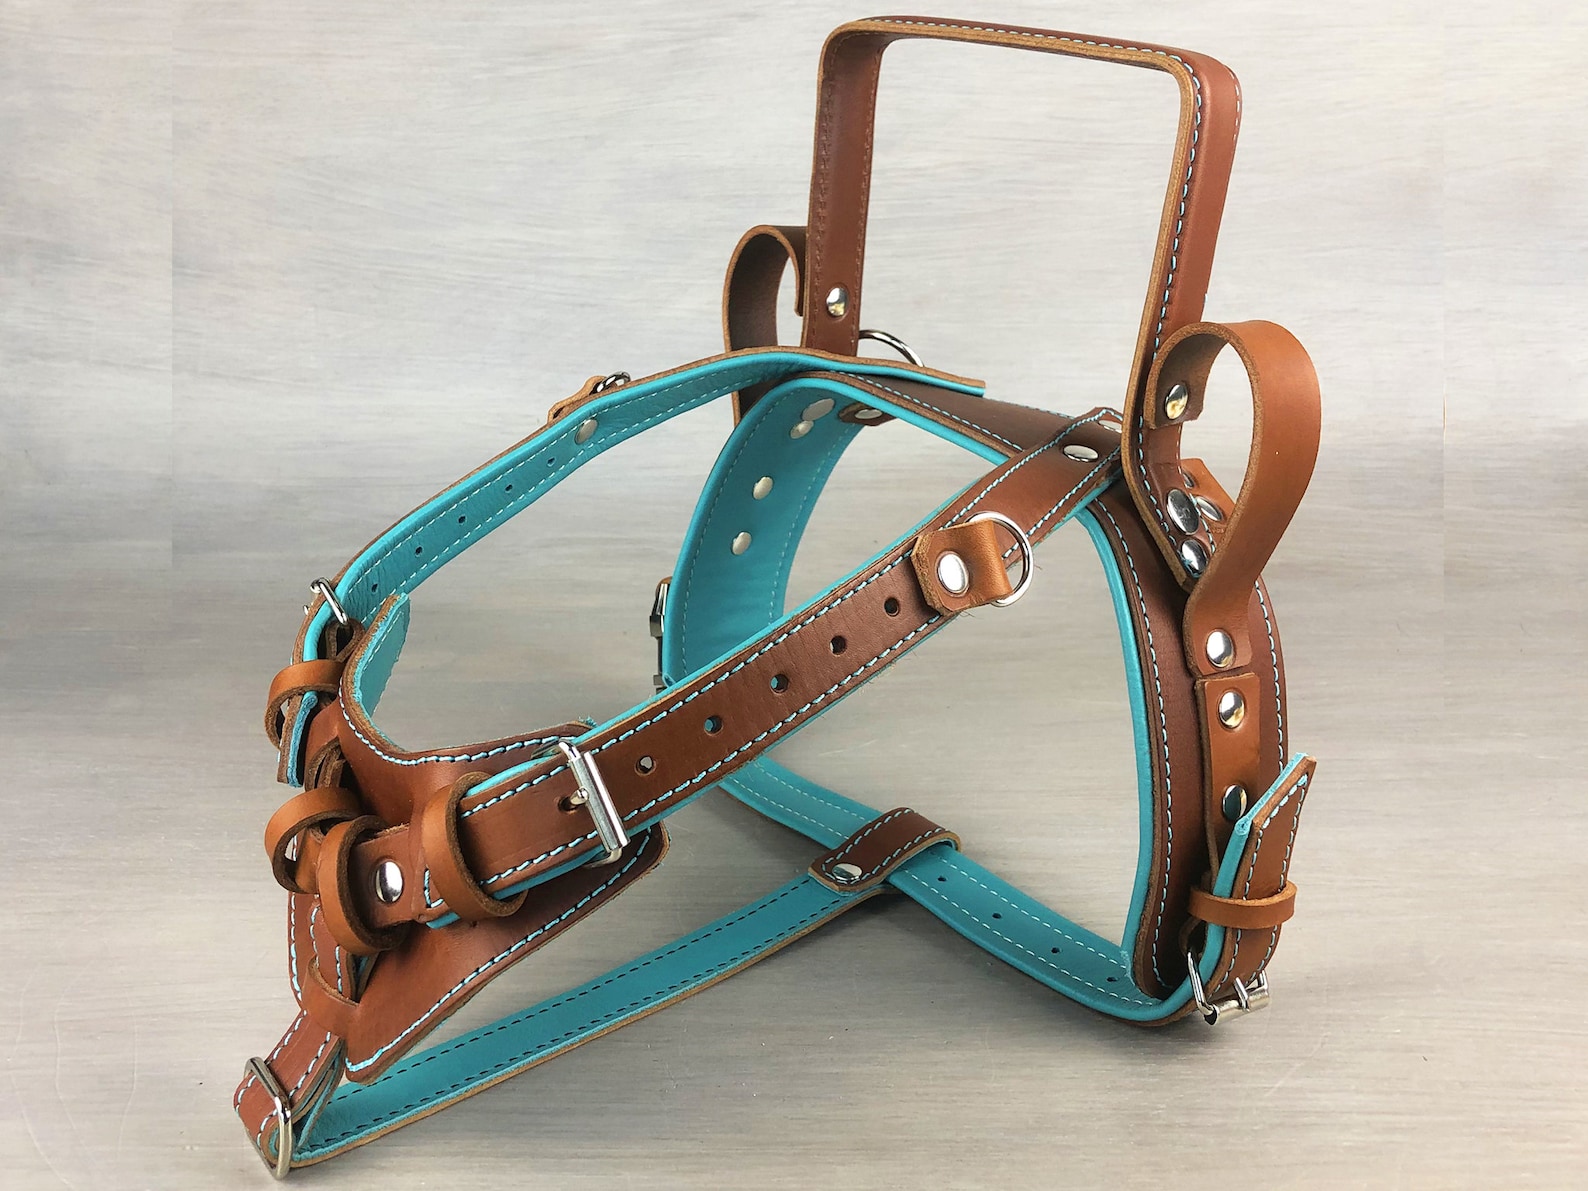 Vegan Leather Dog Harness Sets for small dogs- Julibee's